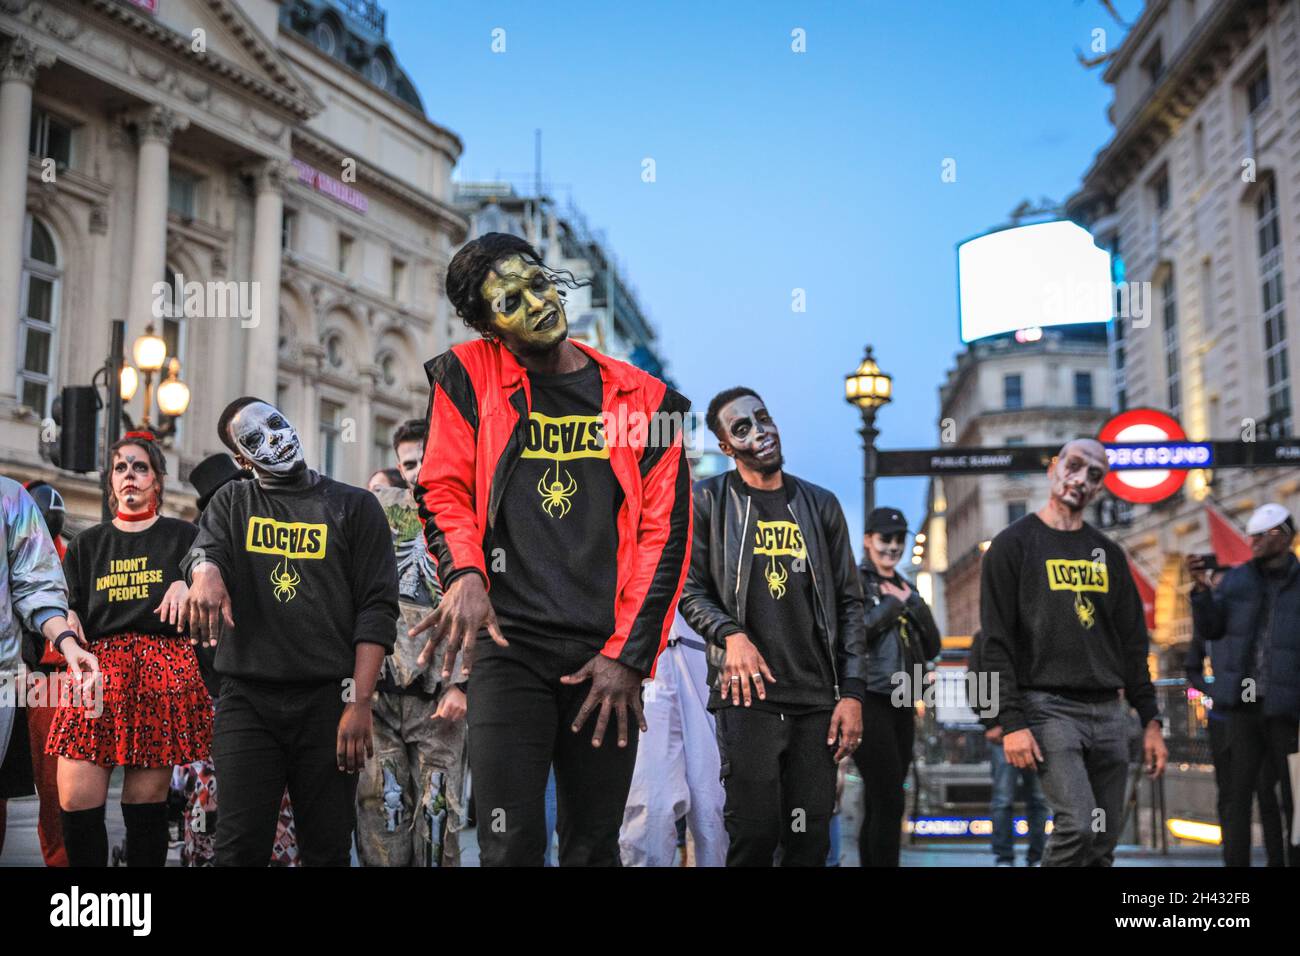 Piccadilly Circus, London, UK. 31st Oct, 2021. The dancers re-create the famous zombie dance scenes from Michael Jackson's 'Thriller' video. Revellers take part in a Halloween dance flashmob, including a group from Locals.org, a London-based social platform and meet up designed to bring Londoners together. Passers-by are encouraged to join in and dance, too. Credit: Imageplotter/Alamy Live News Stock Photo